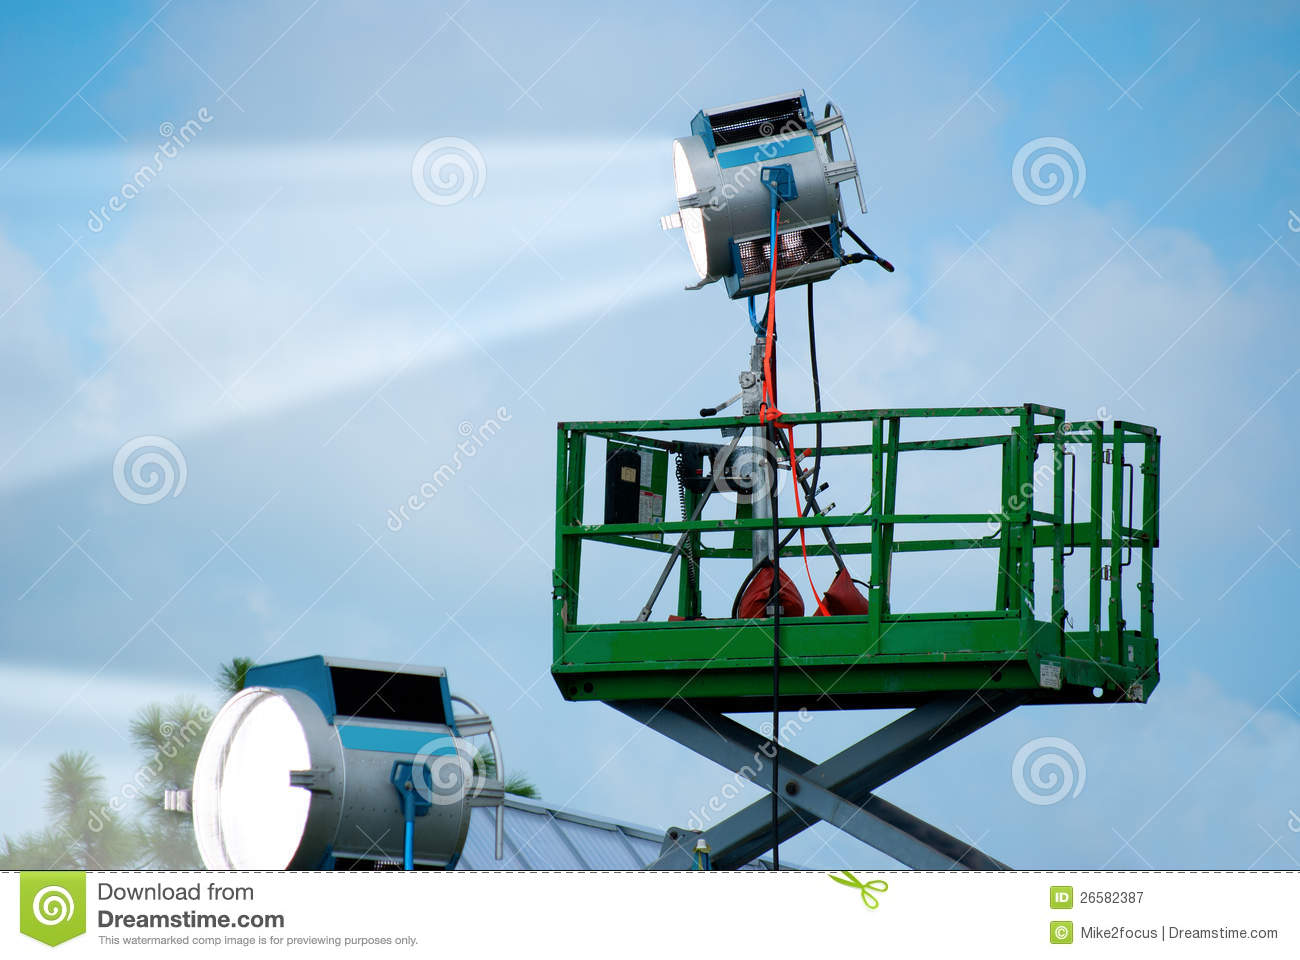 Outdoor Event Powerful Spot Lights Royalty Free Stock Photography